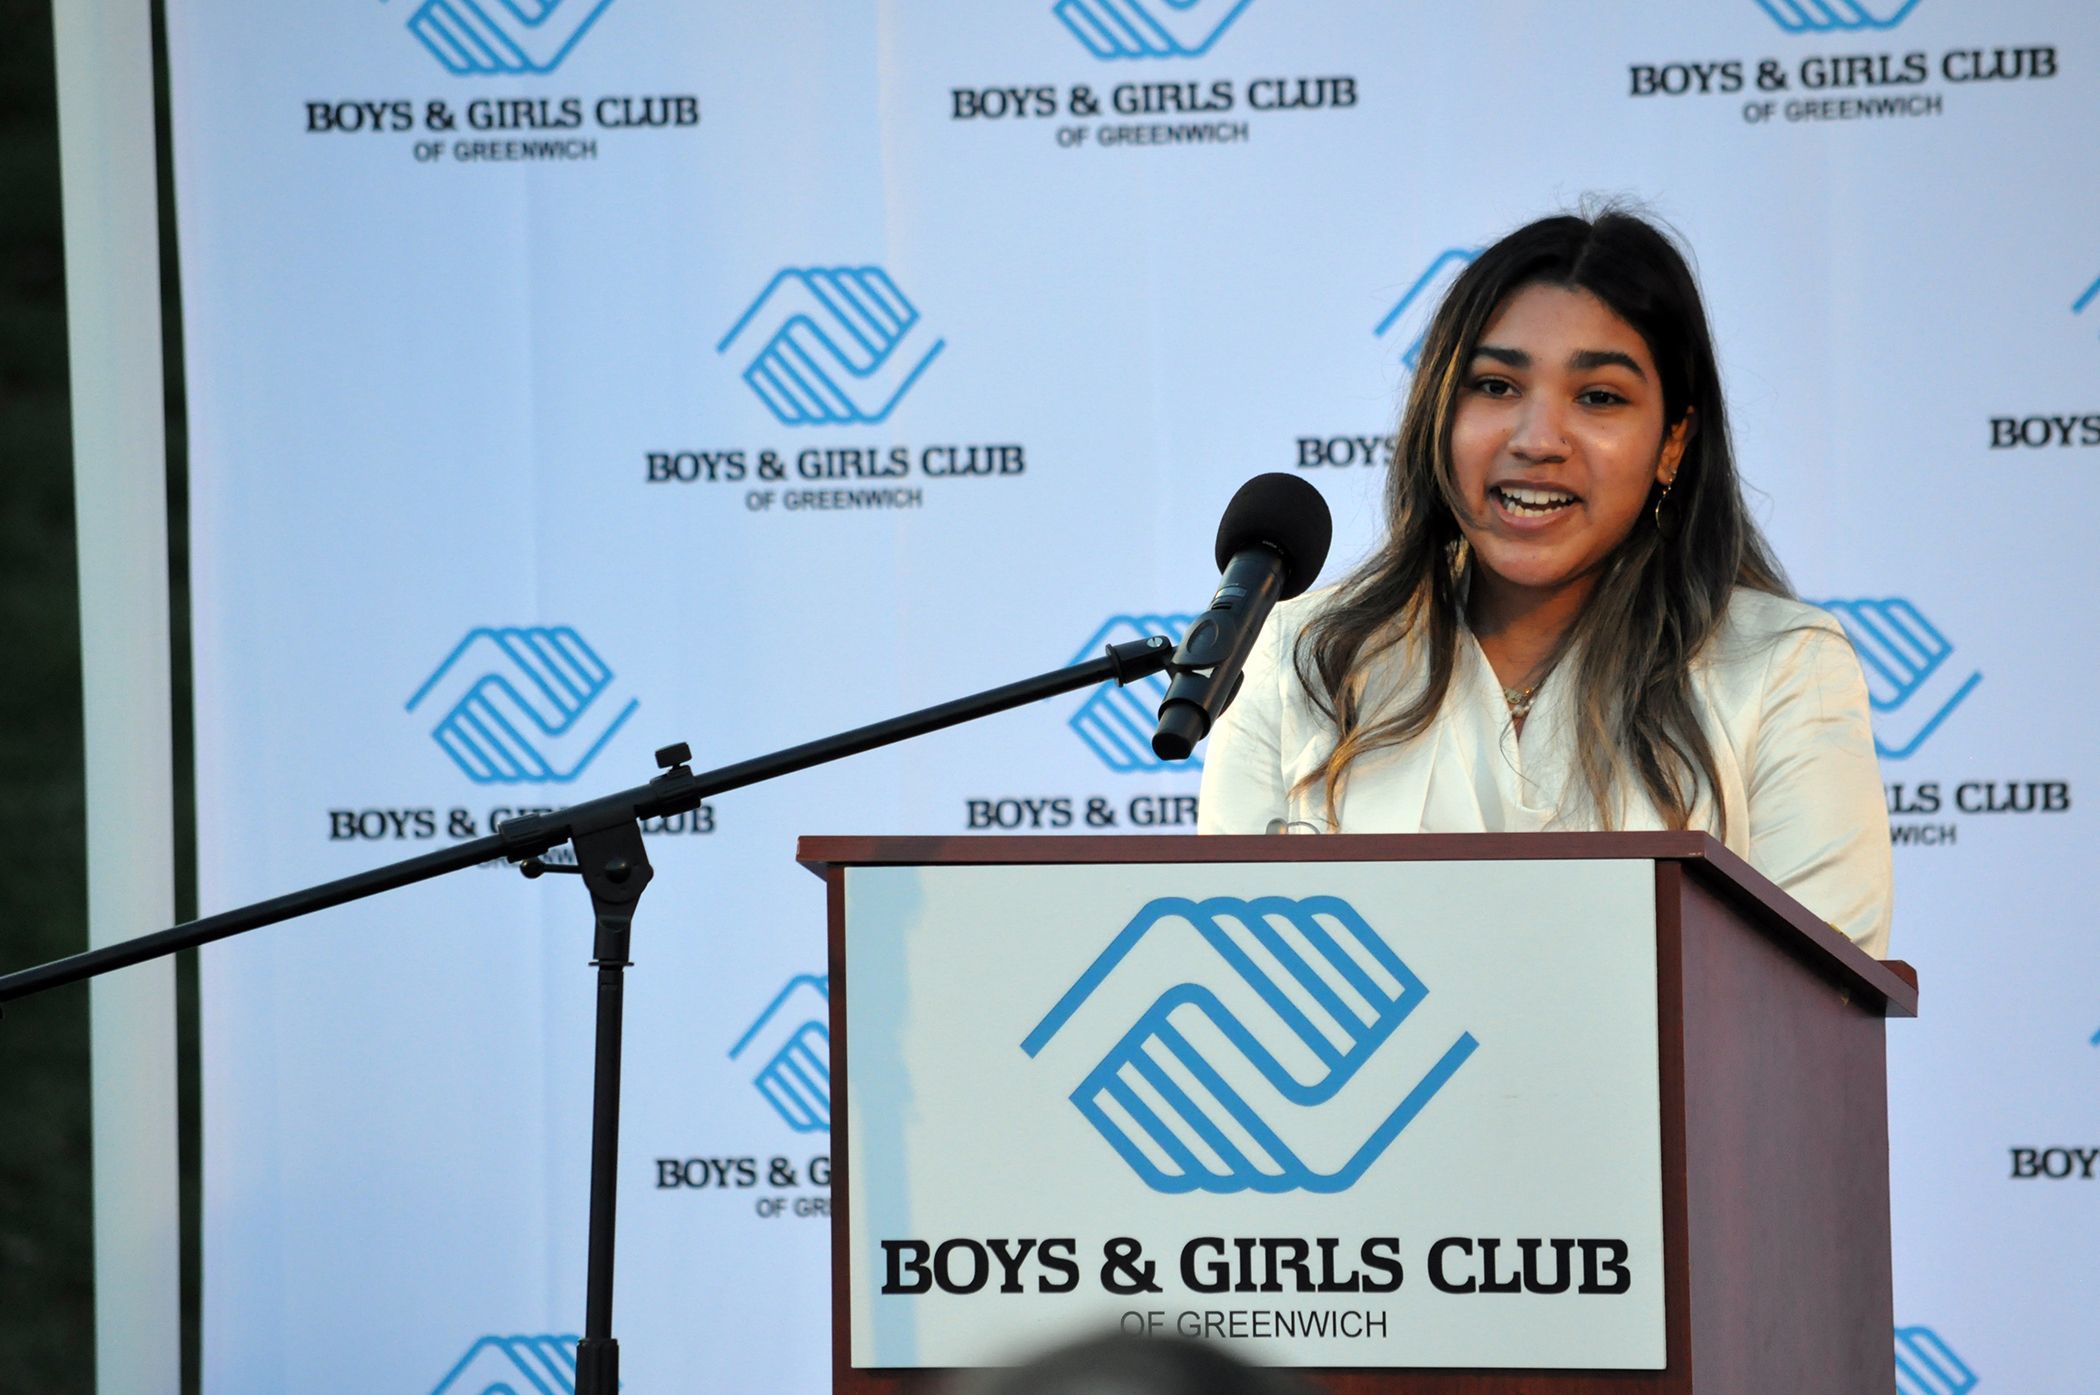 Boys & Girls Club of Greenwich names Damarys Aceituno 2021 Youth of the Year